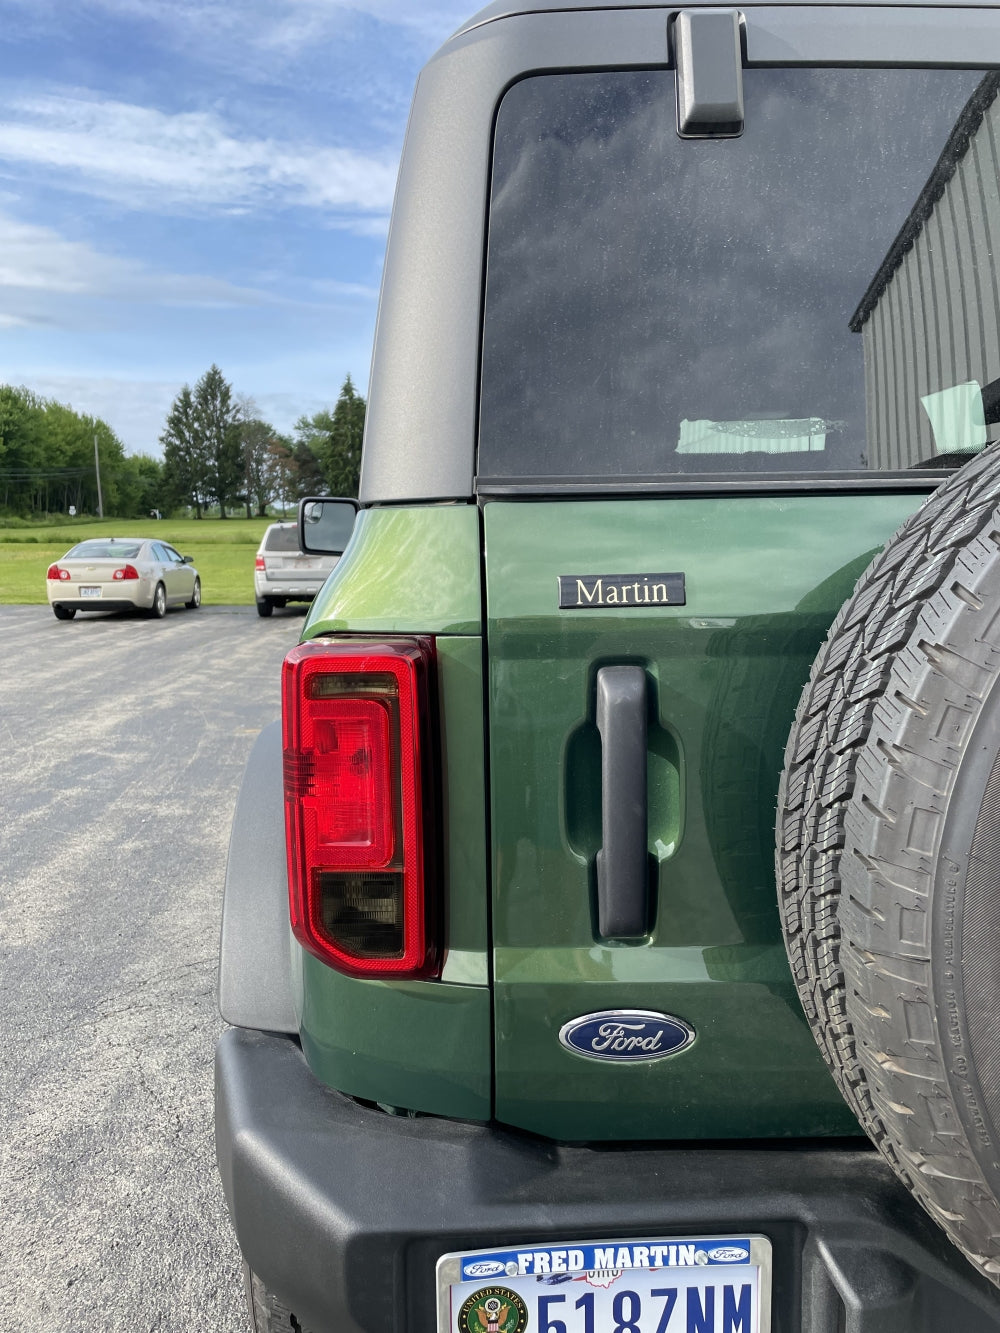 2021-2023 Ford Bronco Tail light Smoked Tint Blackout Package